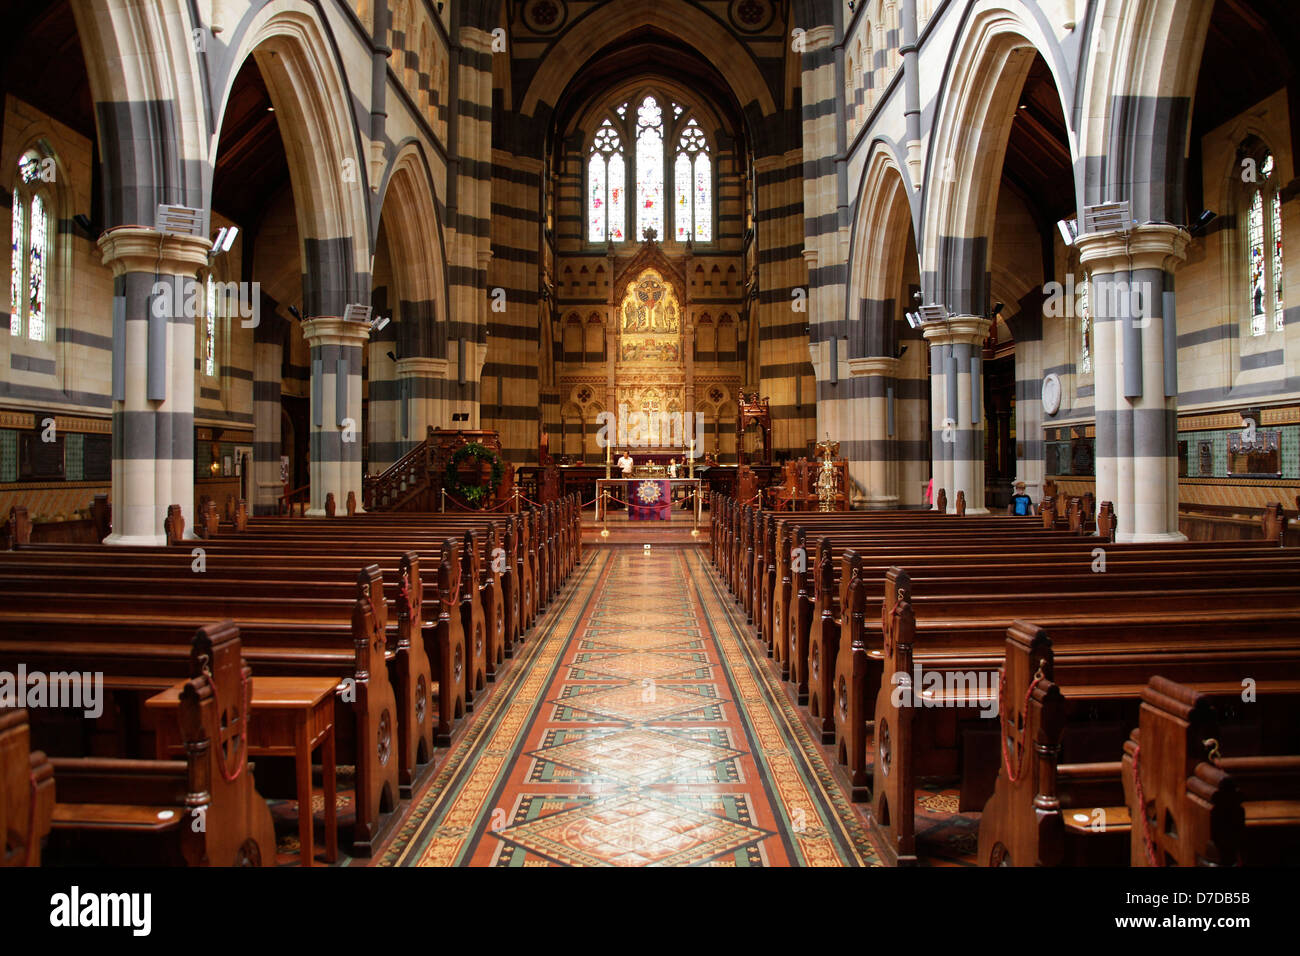 inside the St Paul's Cathedral in Melbourne, Victoria, Australia Stock Photo